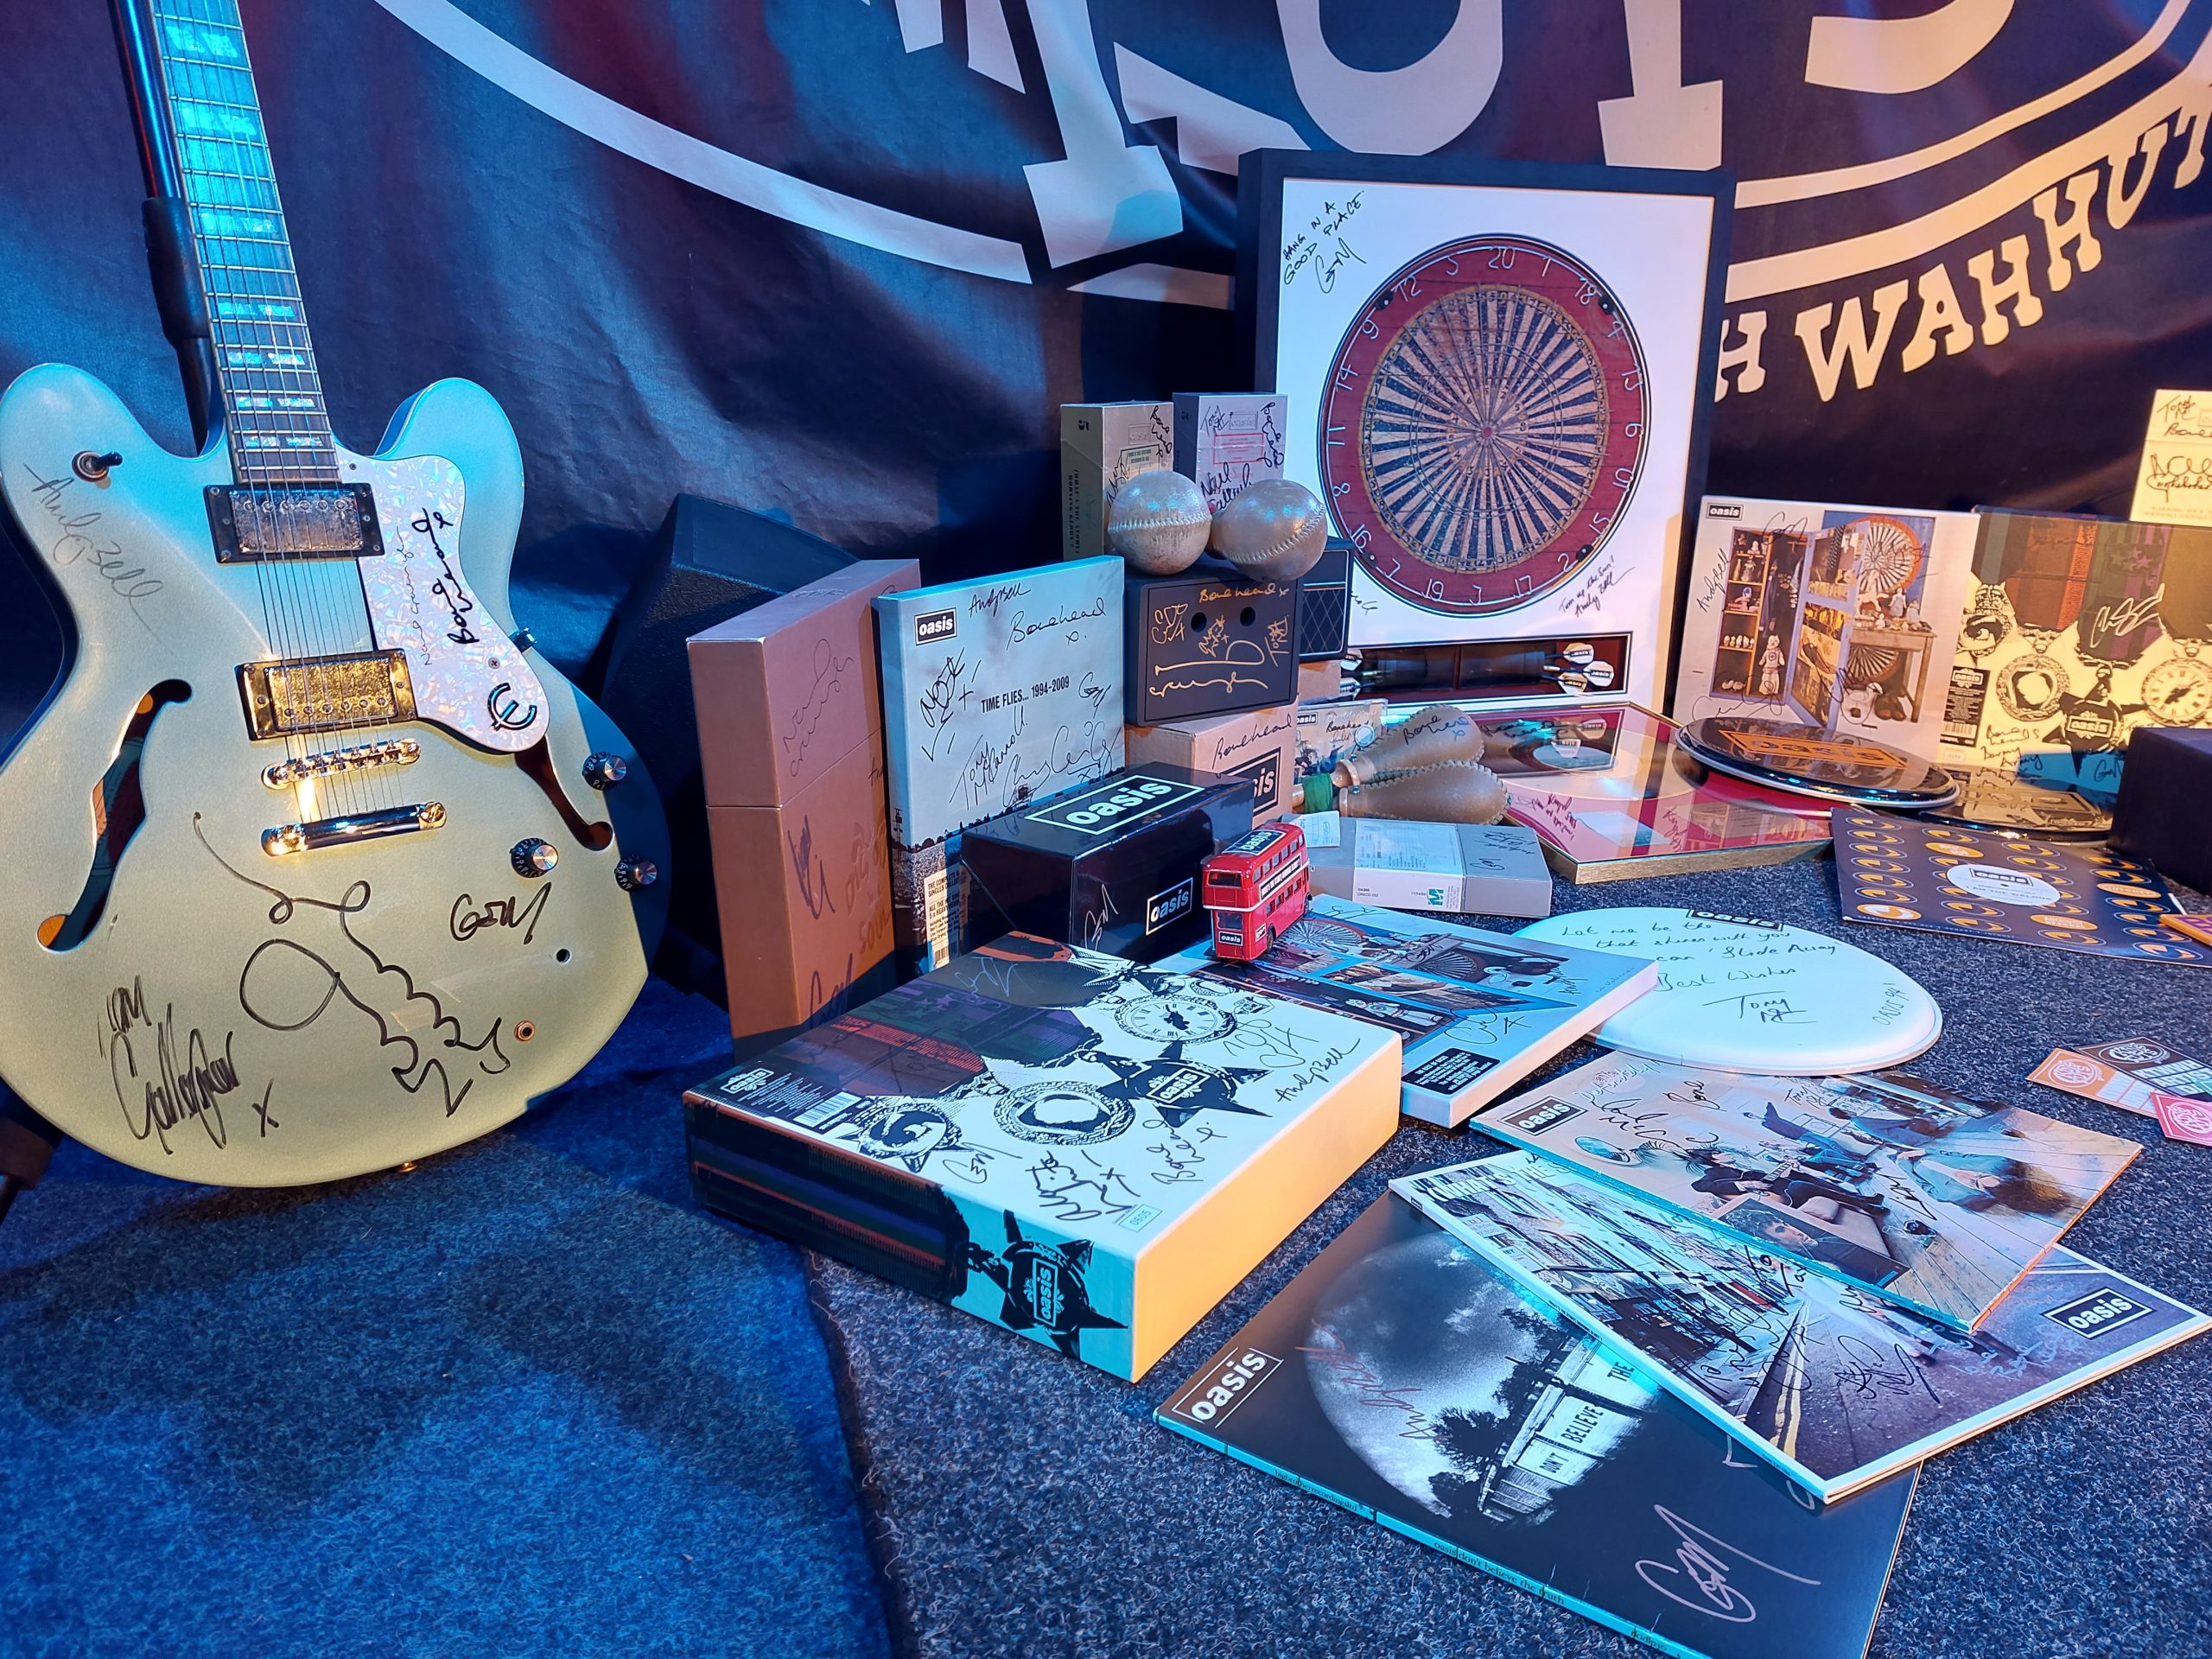 Noel Gallagher's guitars to feature in Oasis exhibition at Salford Lads Club